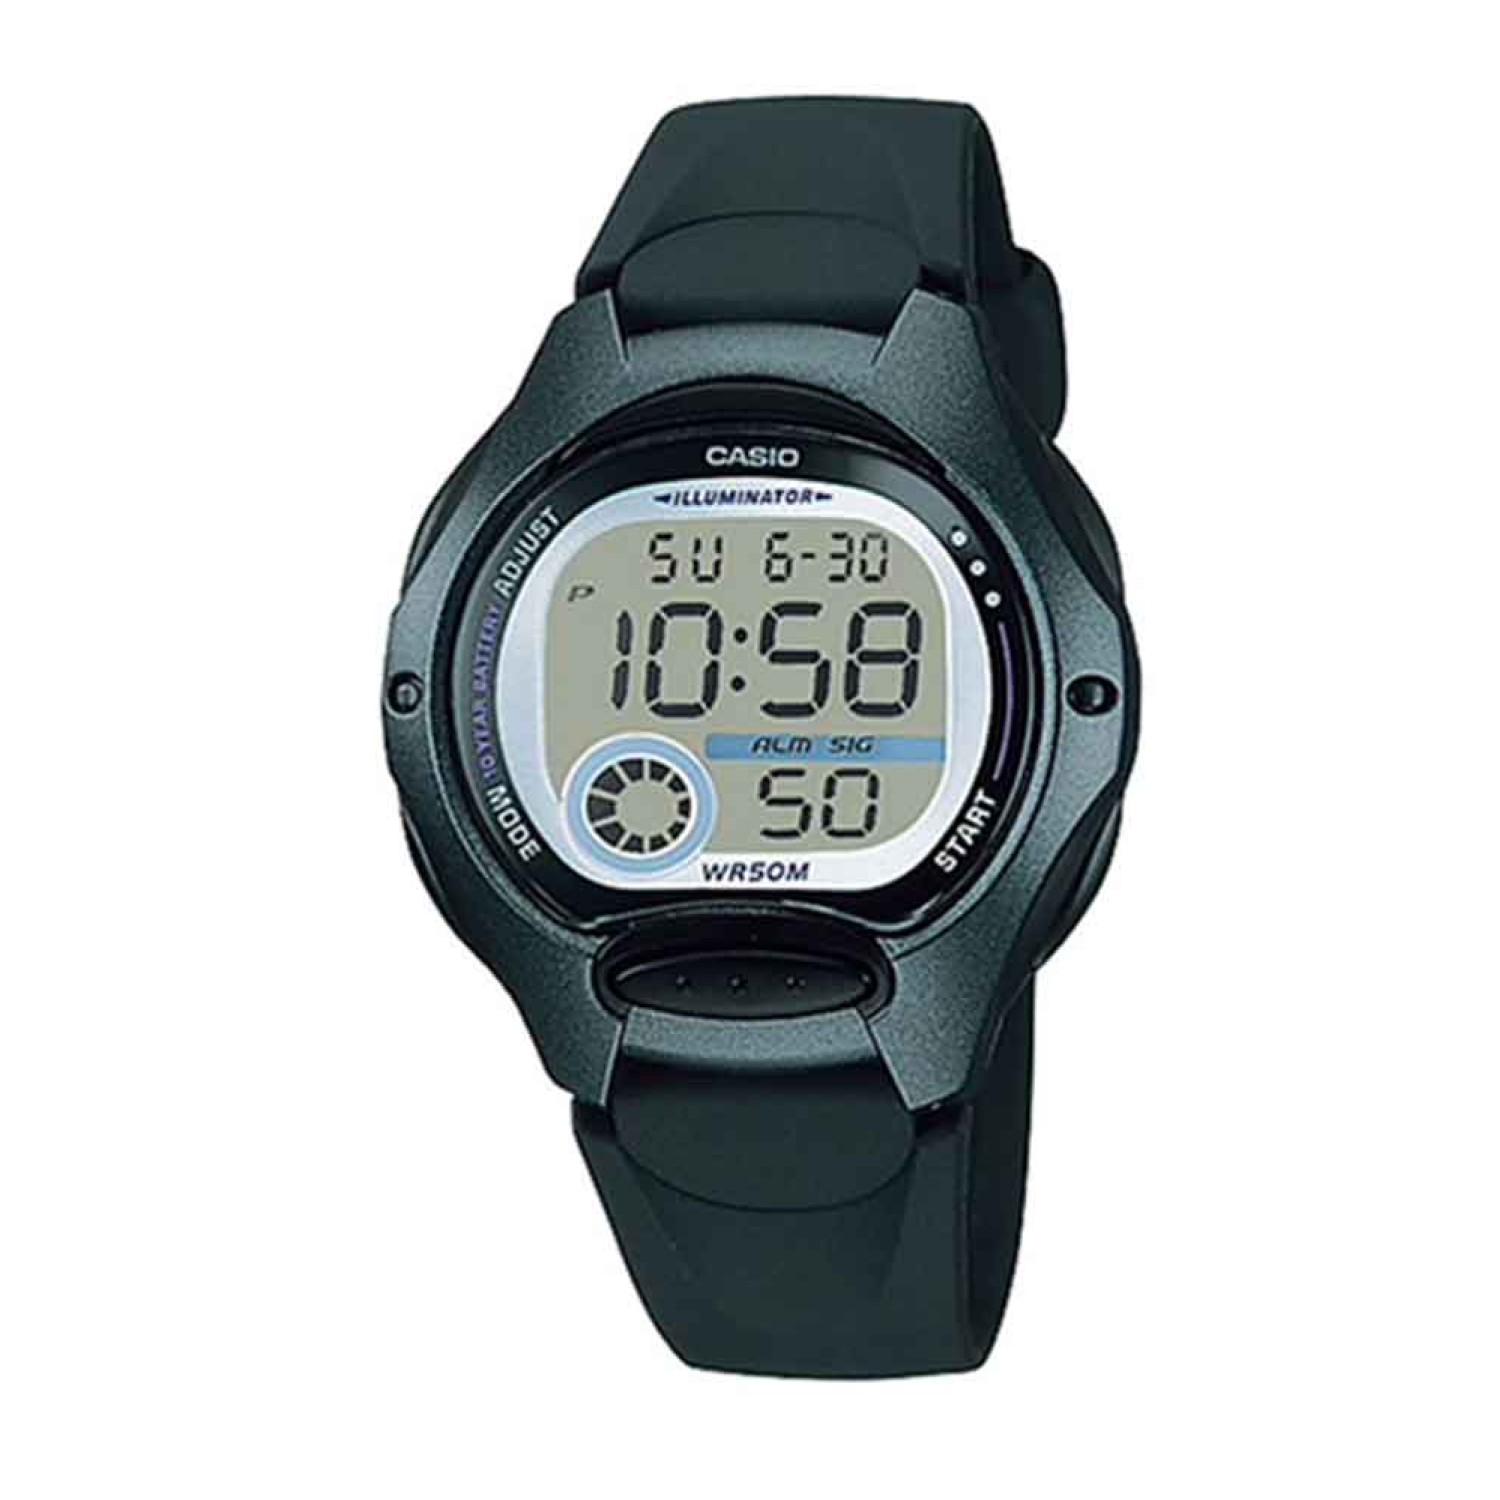 LW200-1B Casio 50 Metres Watch. Casio’s Illuminator digital watch is a sleek and sporty timepiece featuring a black plastic resin band, a metallic resin case and a large digital time display with stopwatch and day and date functions. Water-resistant to @c